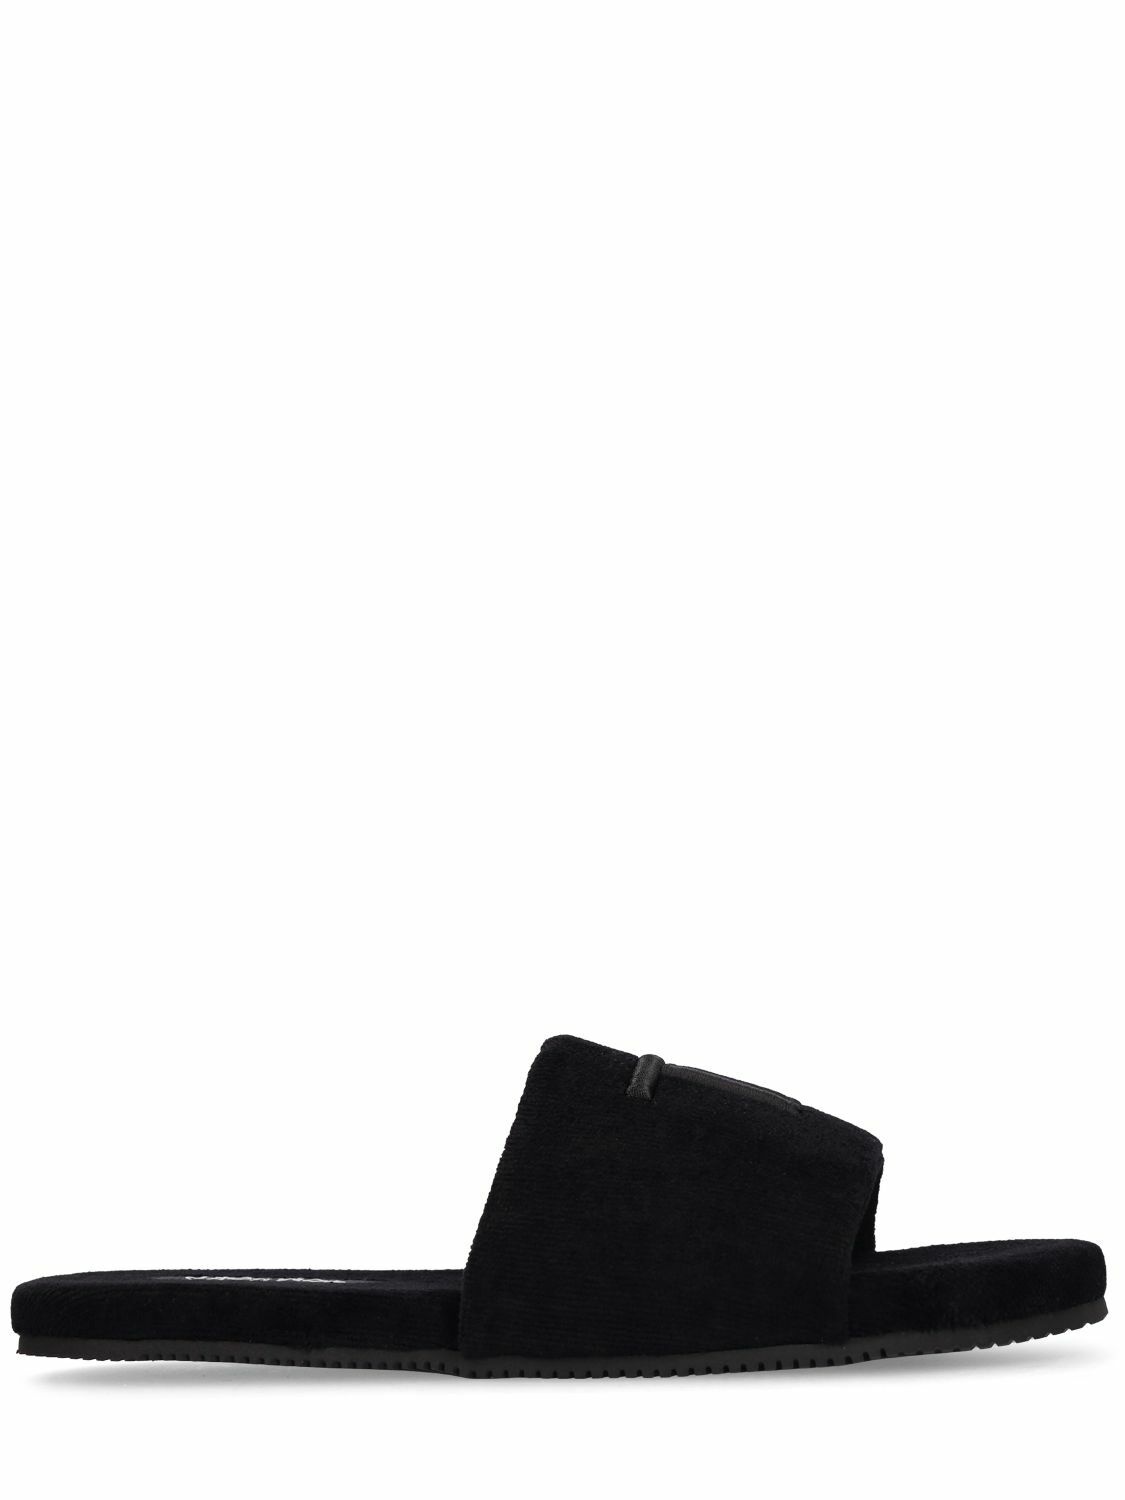 Photo: TOM FORD - Solid Toweling Sandals